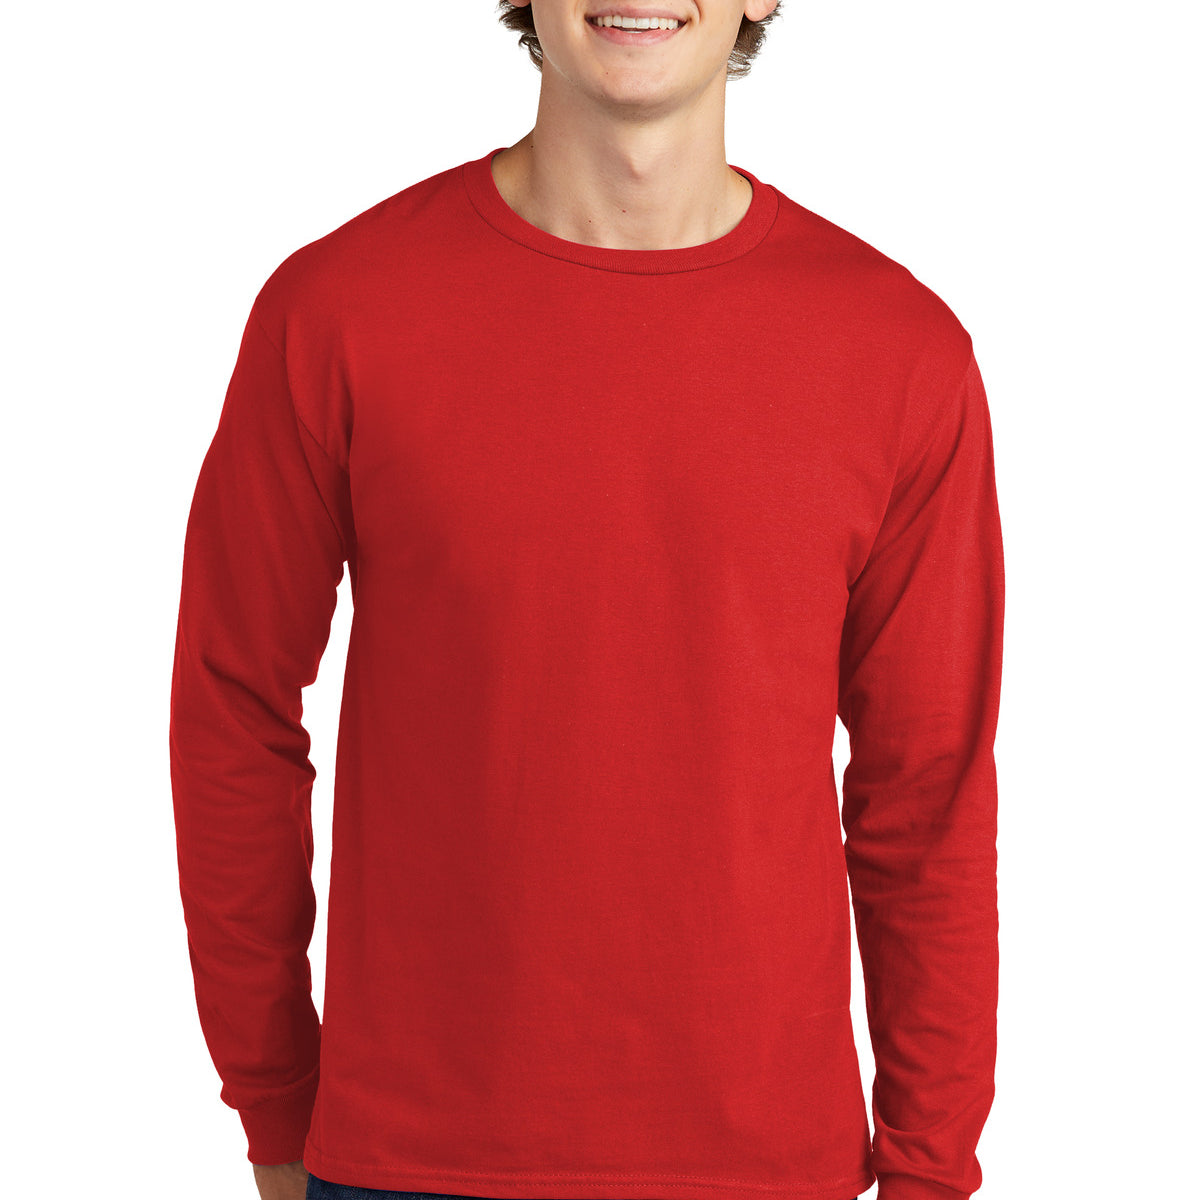 5286-AthleticRed-S